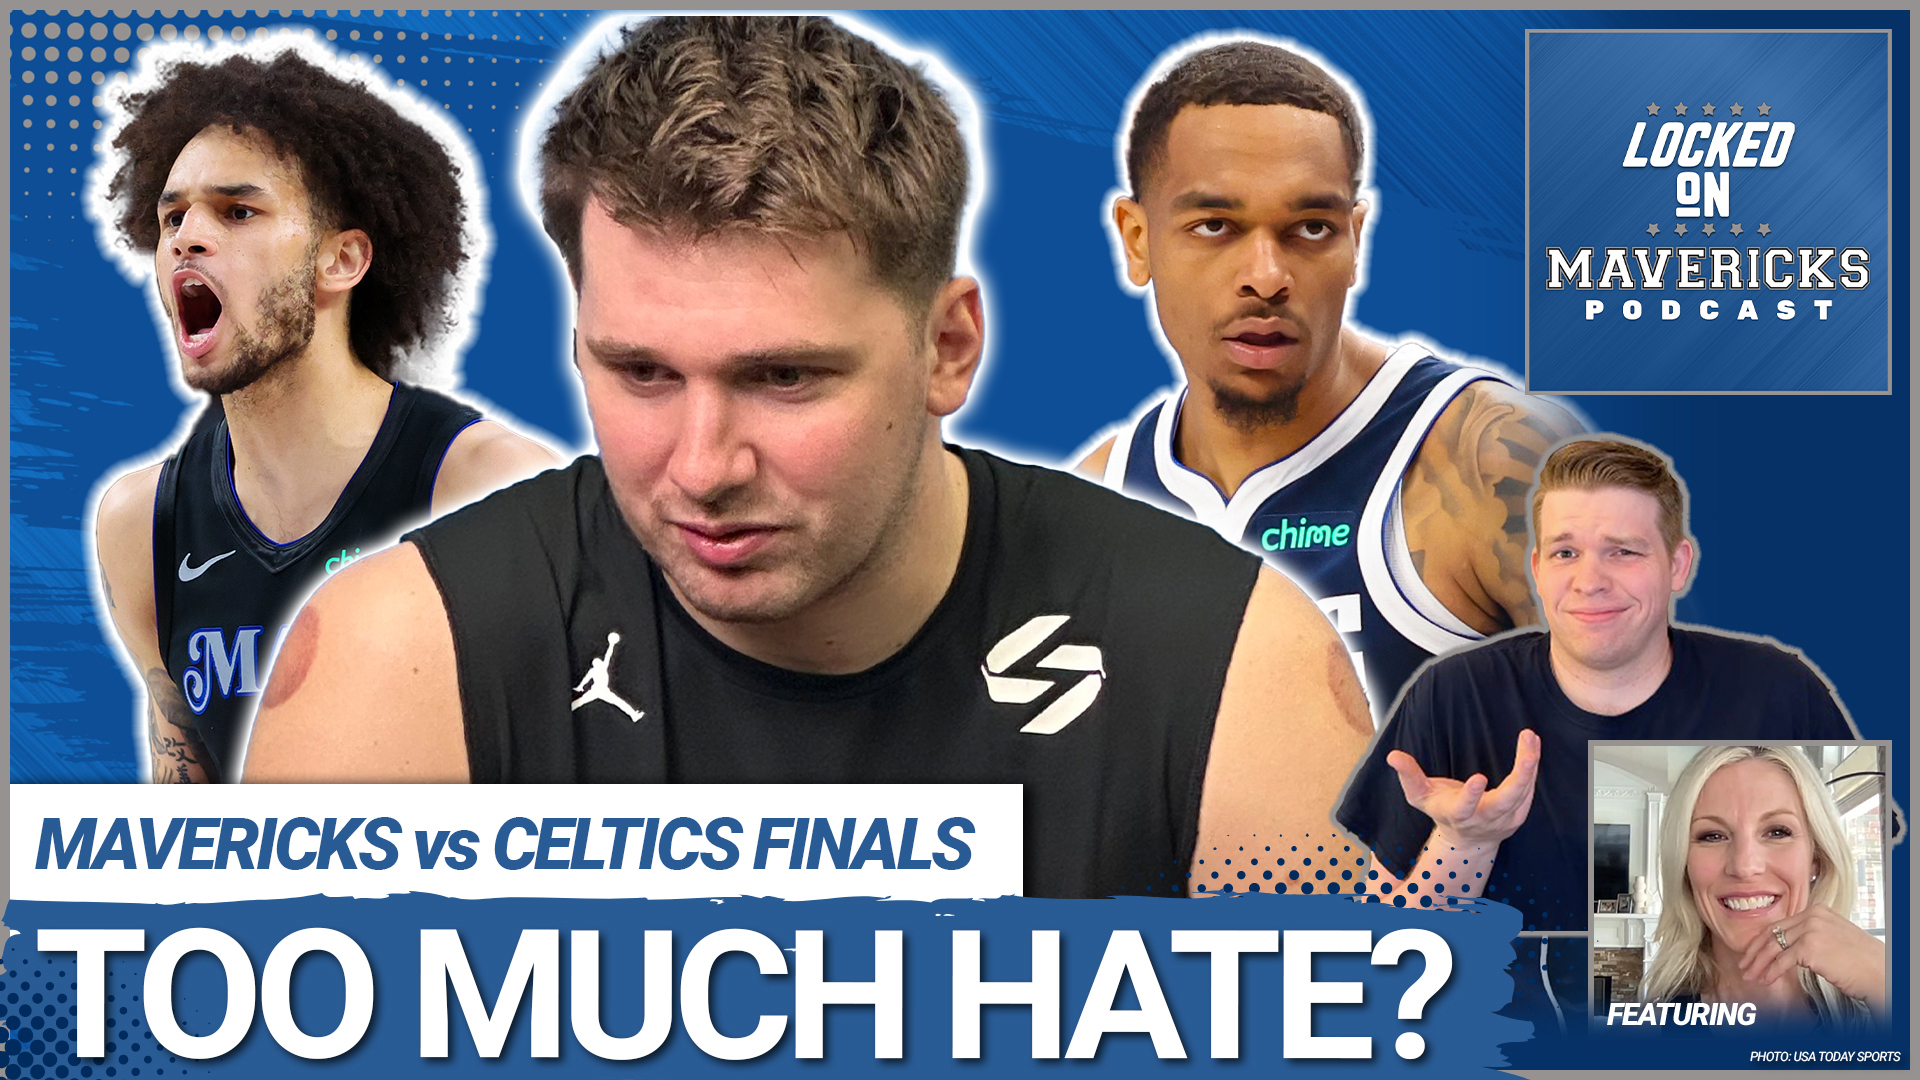 Nick Angstadt & Dana Larson discuss why Luka Doncic is getting attention and hate about his play in the NBA Finals and try to take some positives for the Mavs.